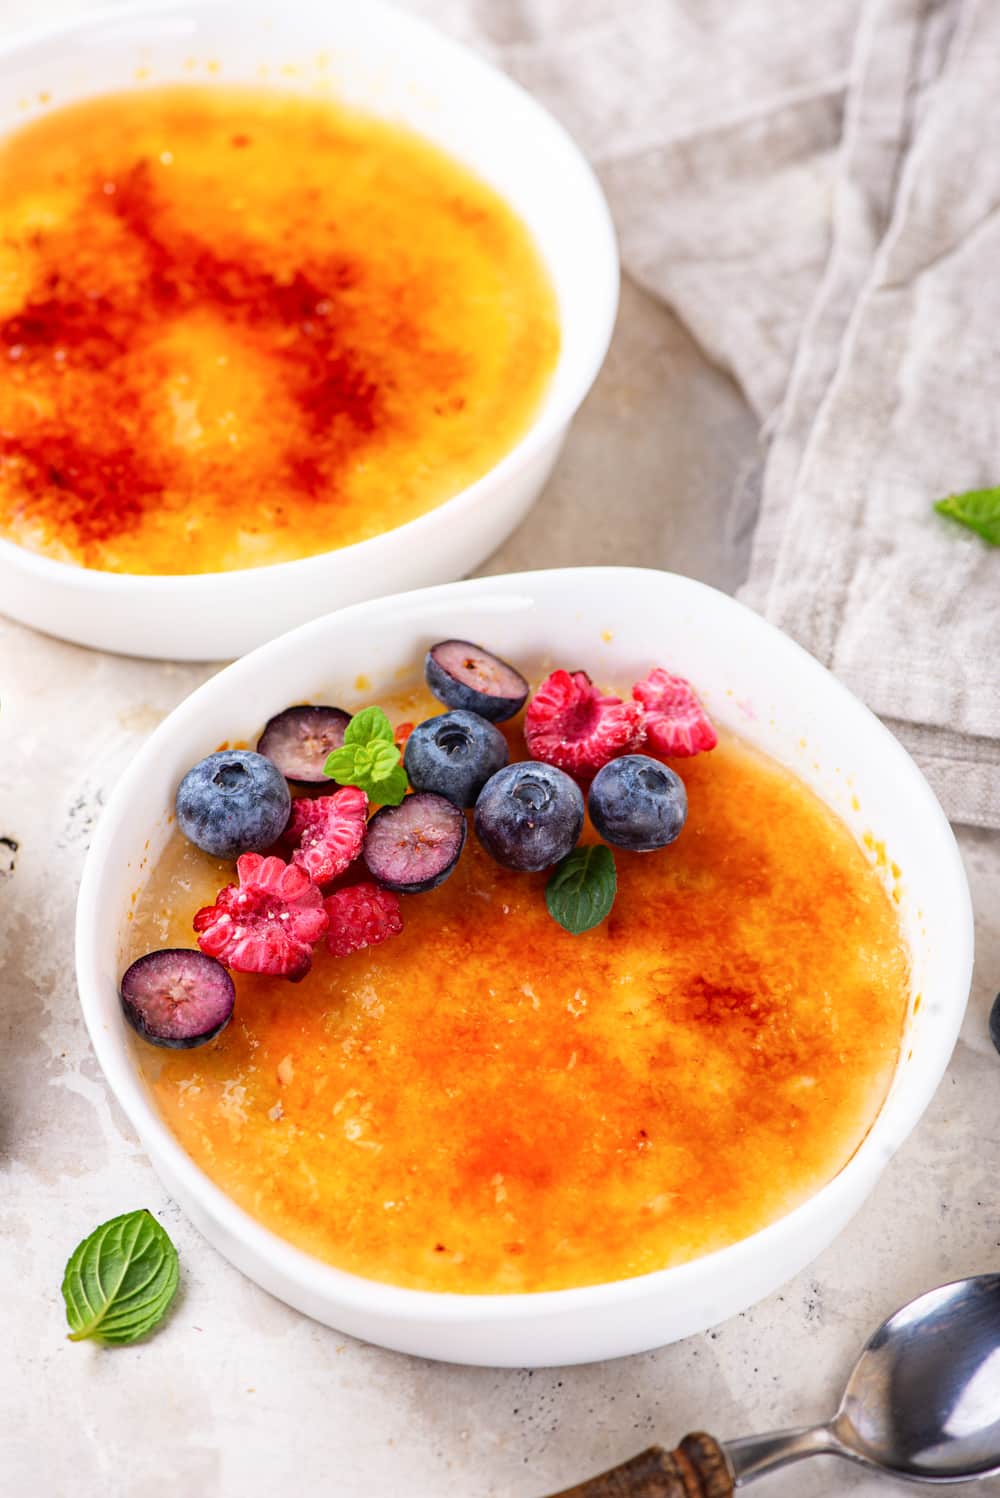 One ramekin filled with creme brulee, with sliced raspberries and blueberries on the back third of the surface of the creme brulee. A ramekin filled with creme brulee is behind it. Both ramekins are on a white counter.